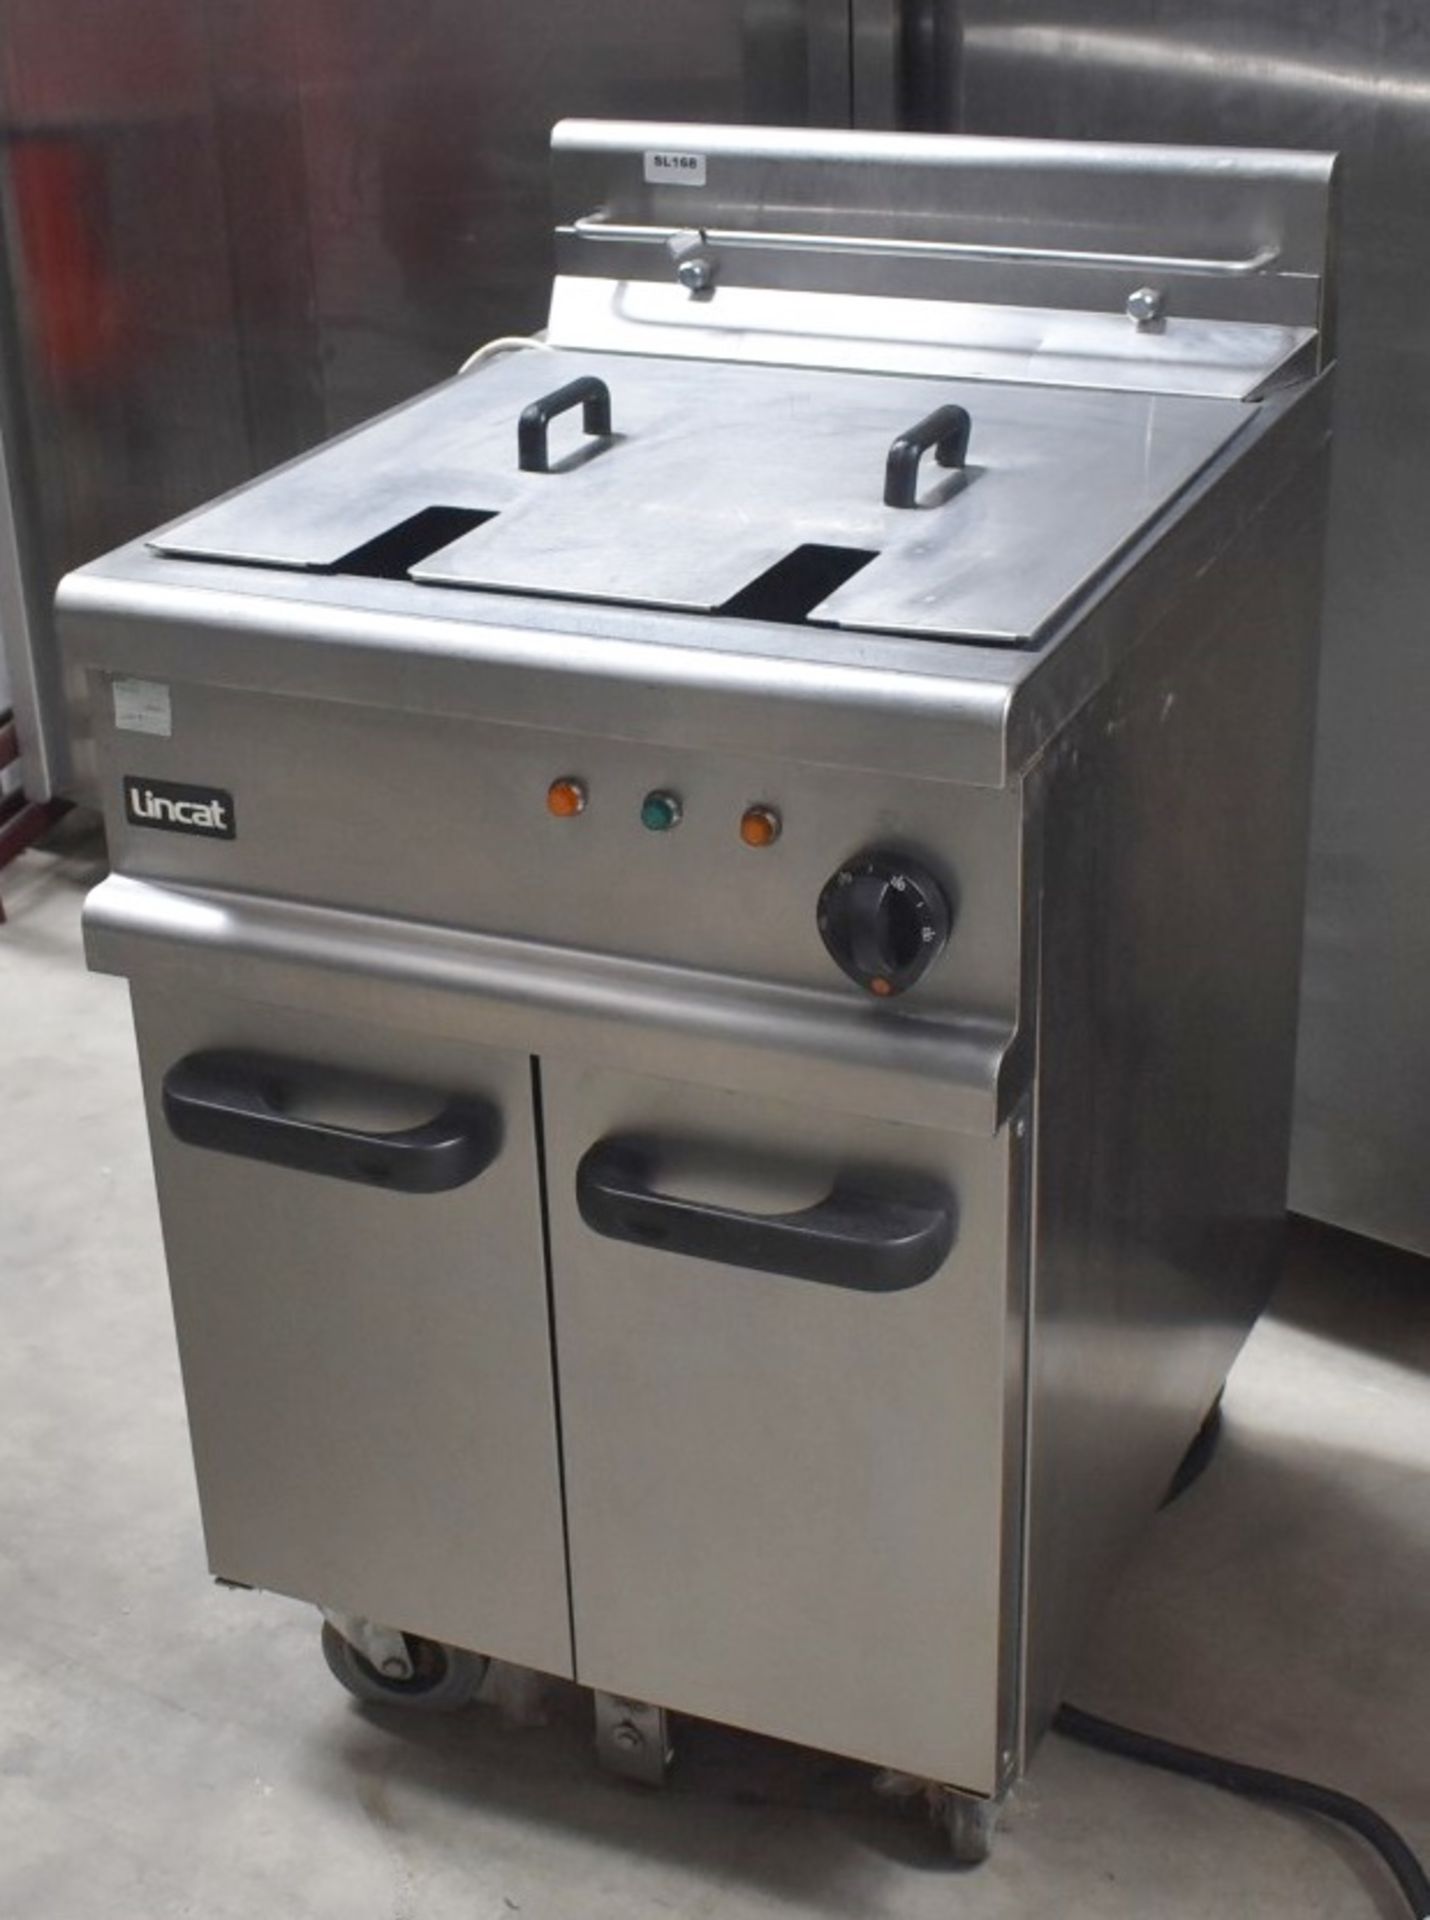 1 x Lincat Opus 700 Single Tank Electric Fryer With Built In Filtration - 3 Phase - Approx RRP £3,